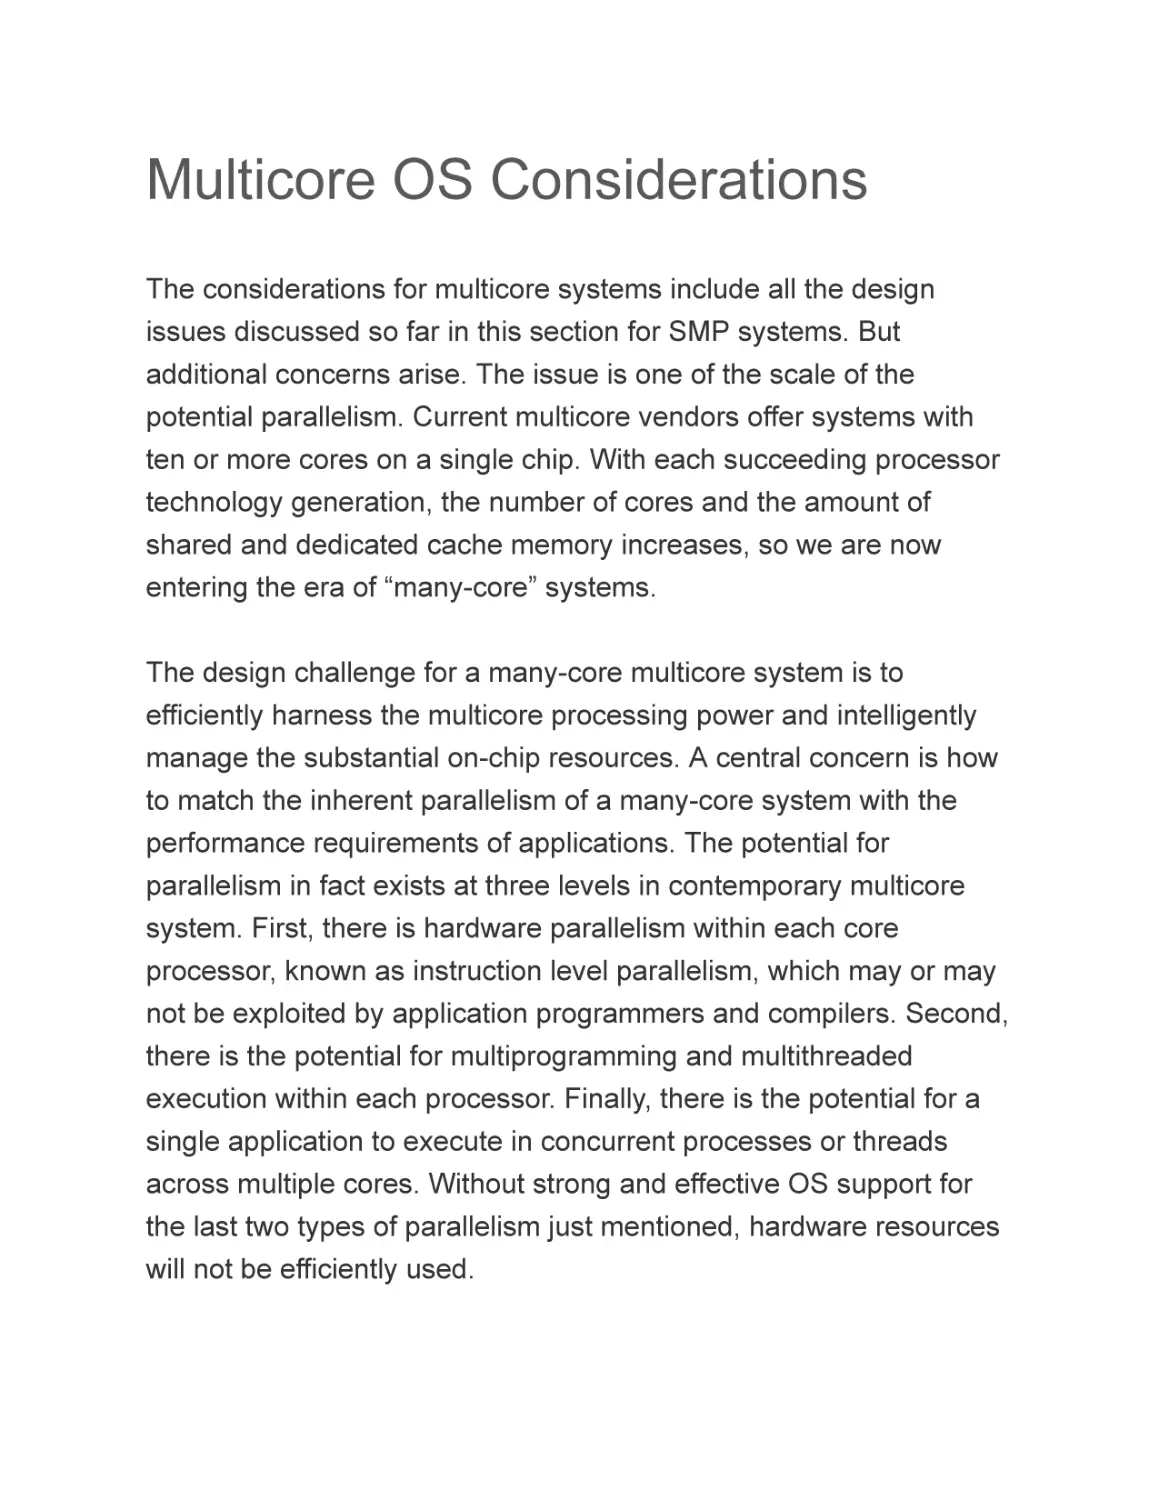 Multicore OS Considerations